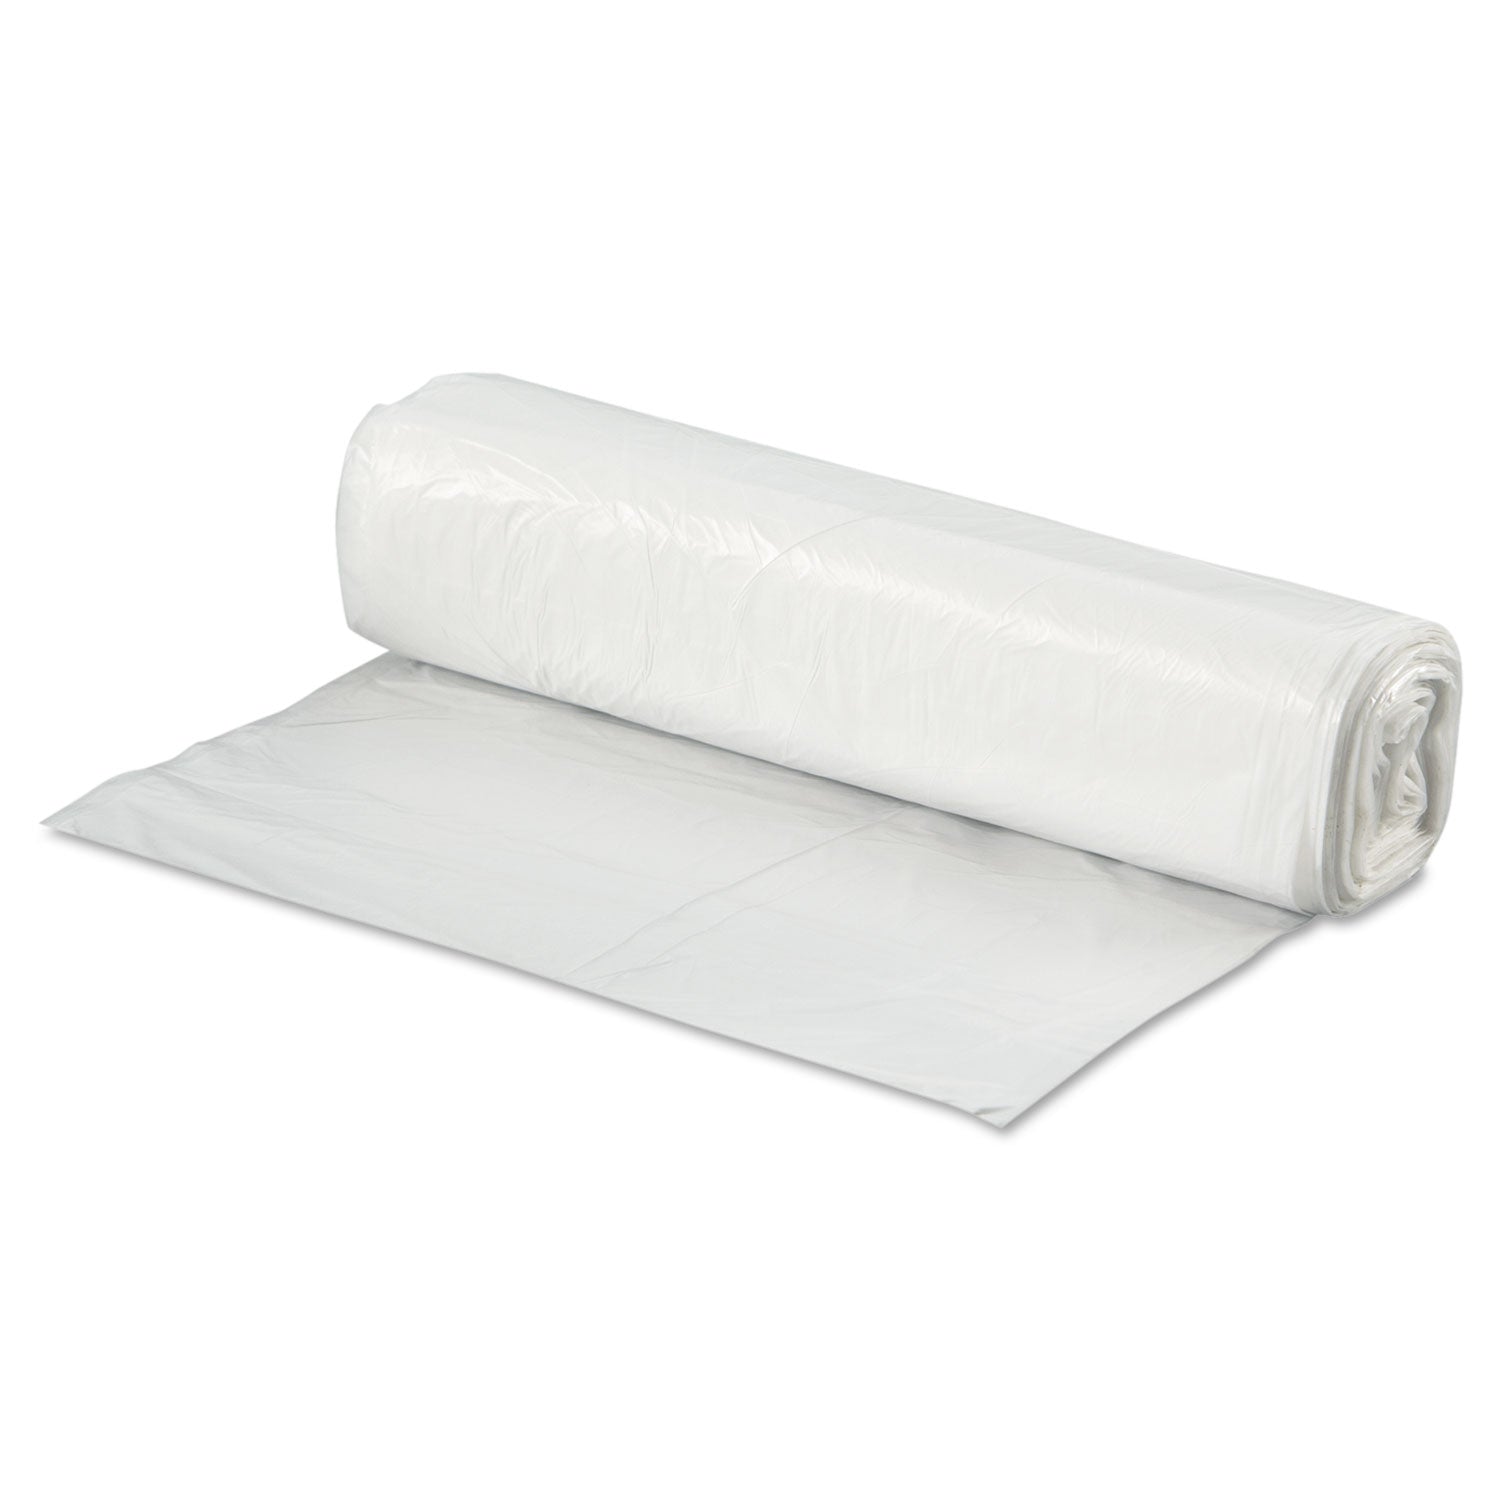 high-density-can-liners-33-gal-9-mic-33-x-39-natural-25-bags-roll-20-rolls-carton_bwk333912 - 3